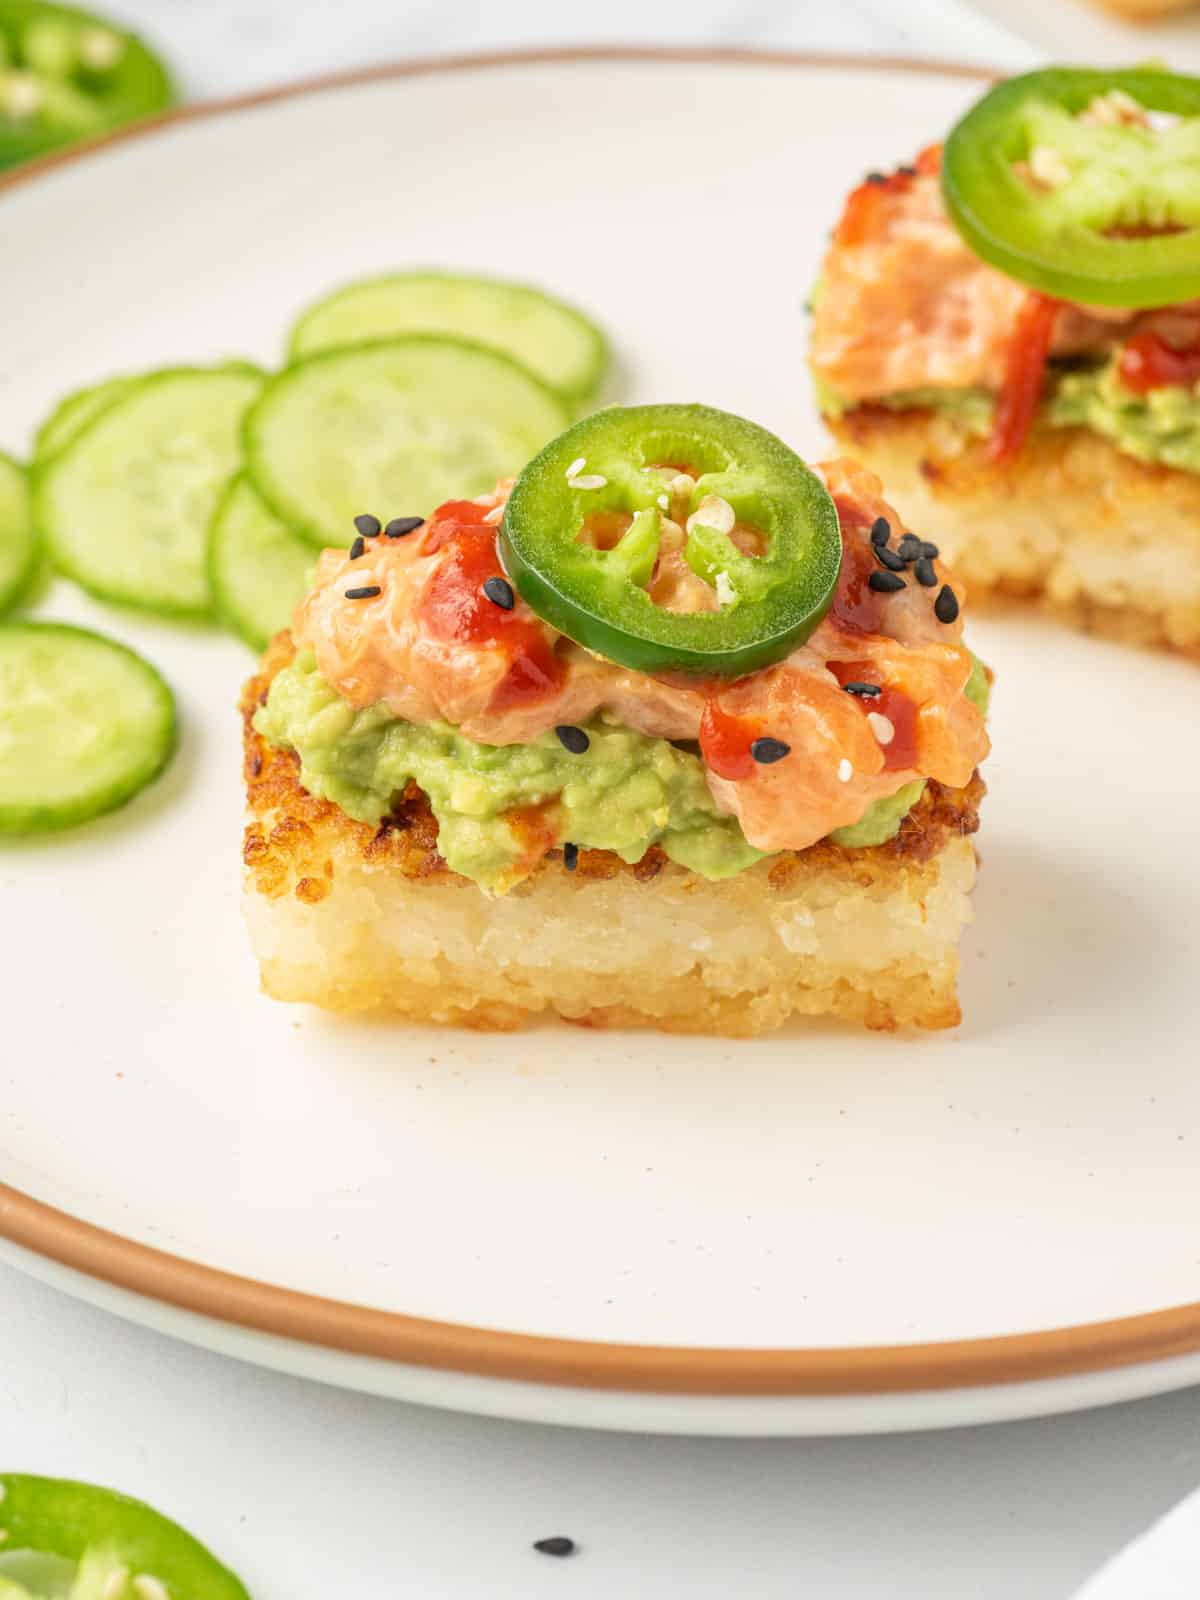 Spicy salmon crispy rice topped with jalapeno on a plate.